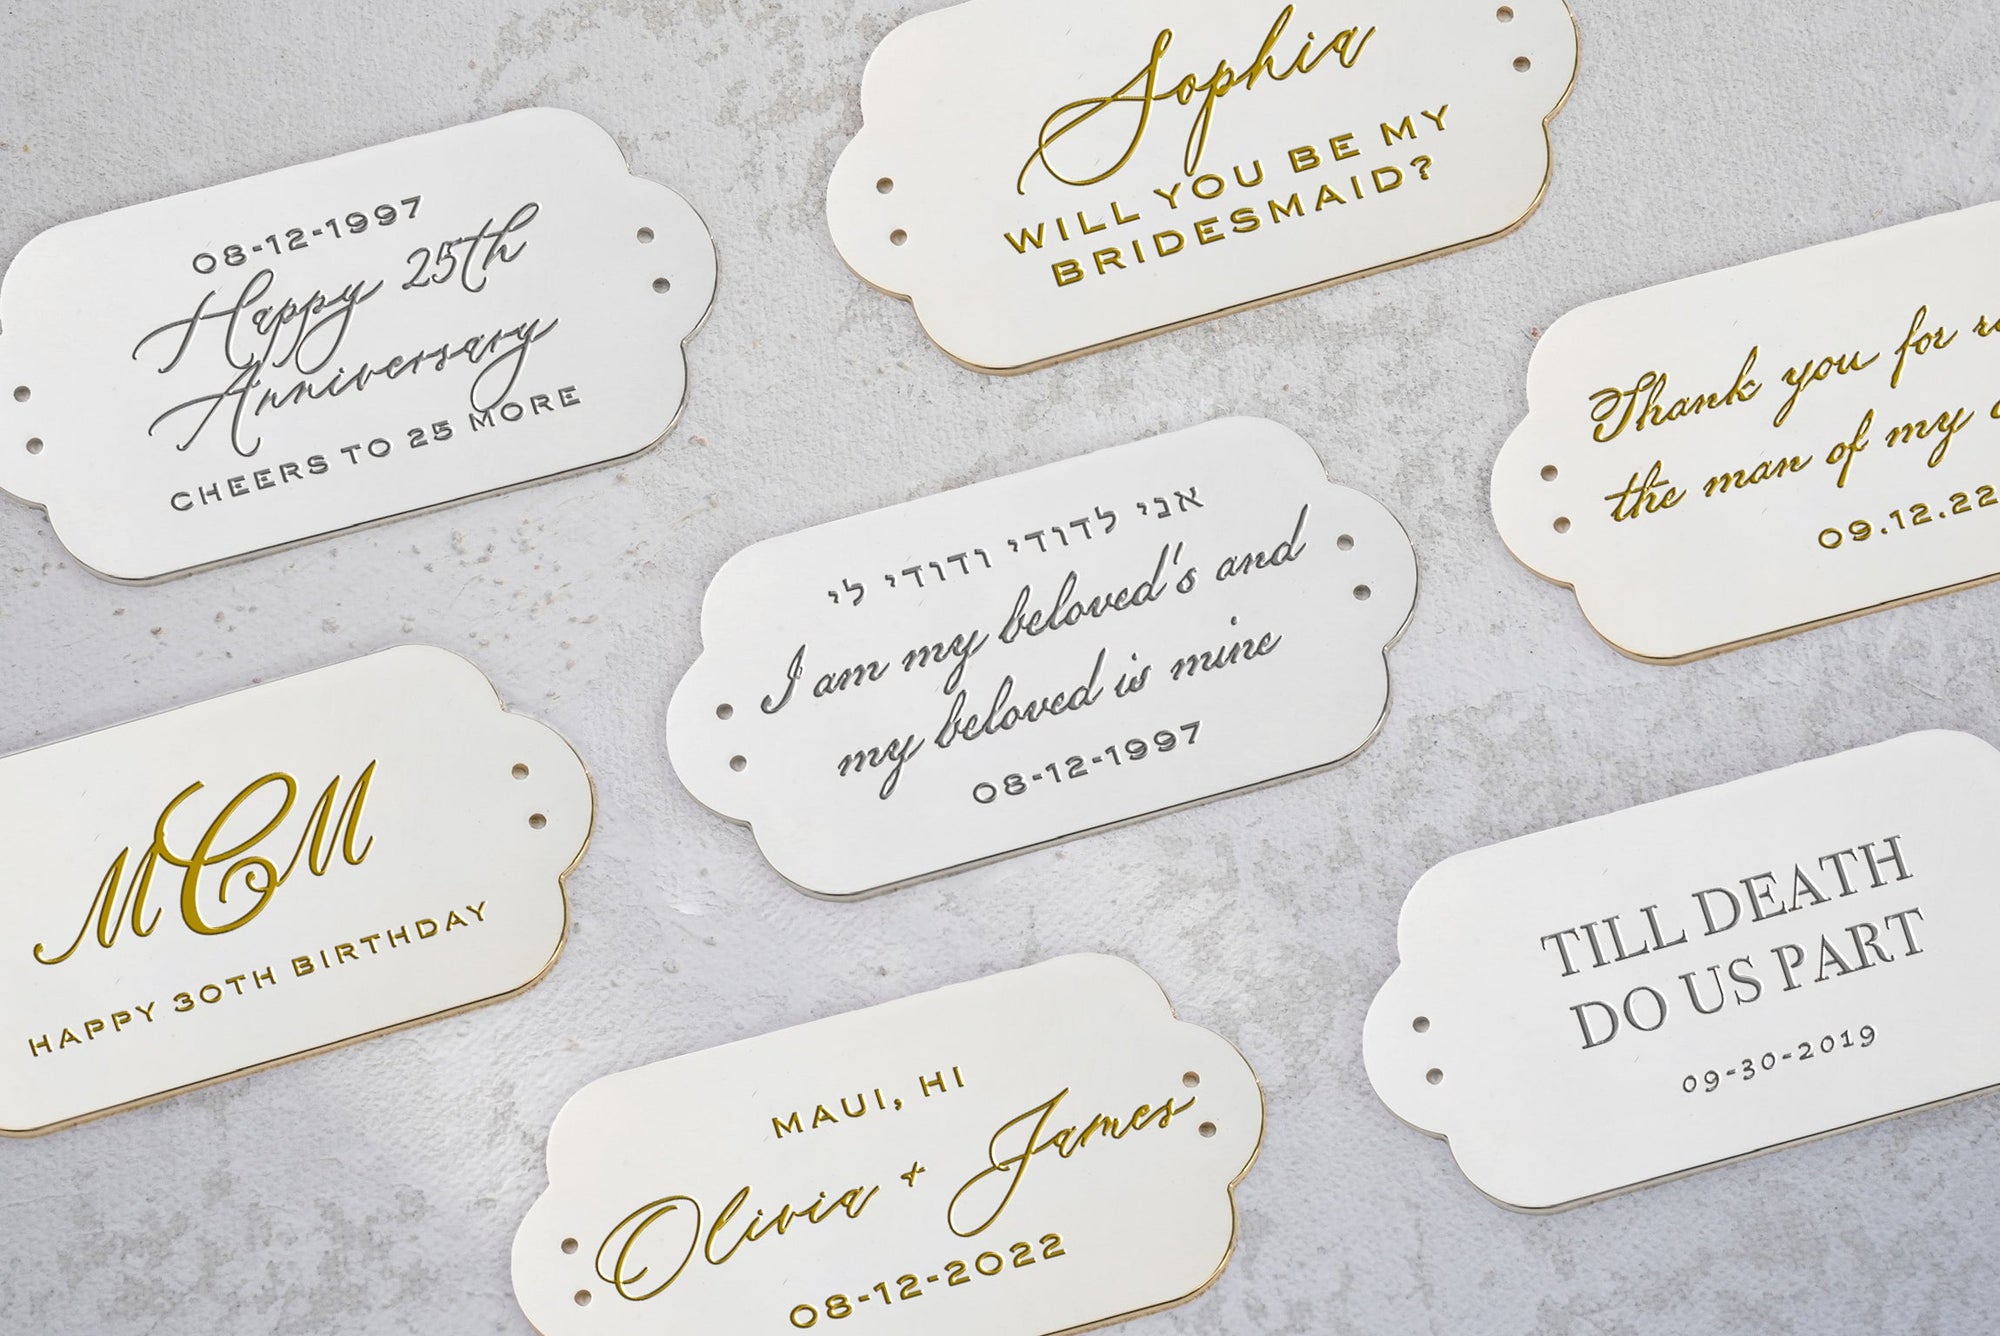 A collection of personalized celebratory cards with gold text and edges on a light surface, each commemorating different special occasions like weddings and anniversaries, including designs inspired by the Bella Clutch Sage Green Satin Petite from The Bella Rosa Collection.